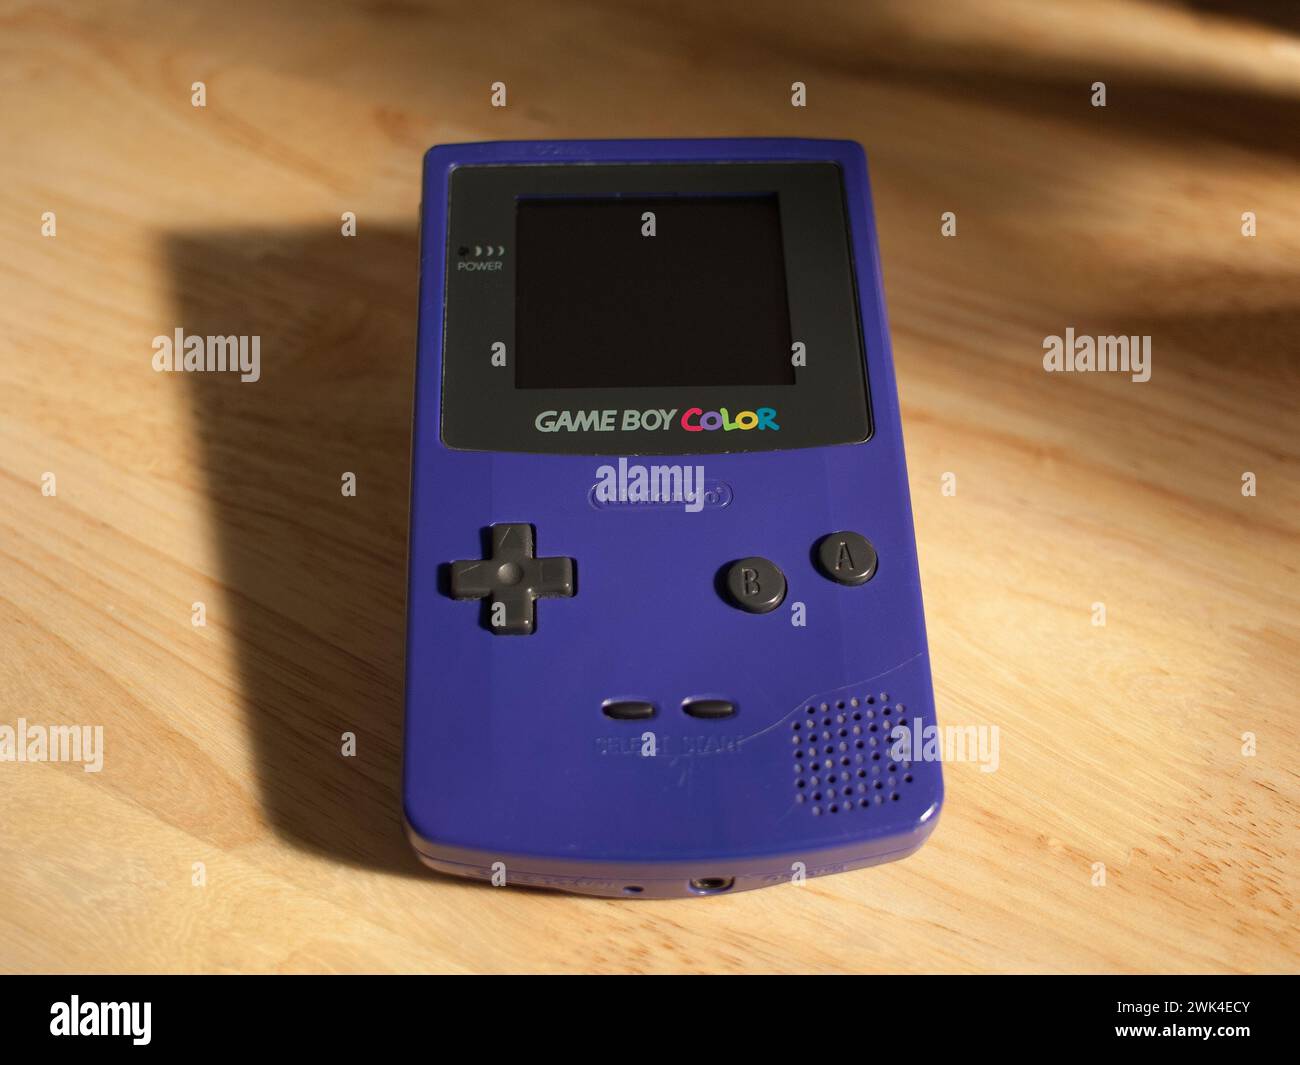 Miami, Florida, United States - November 26, 2023: Vintage Nintendo Game Boy Color handheld console color model Grape (blue) on a table. Stock Photo